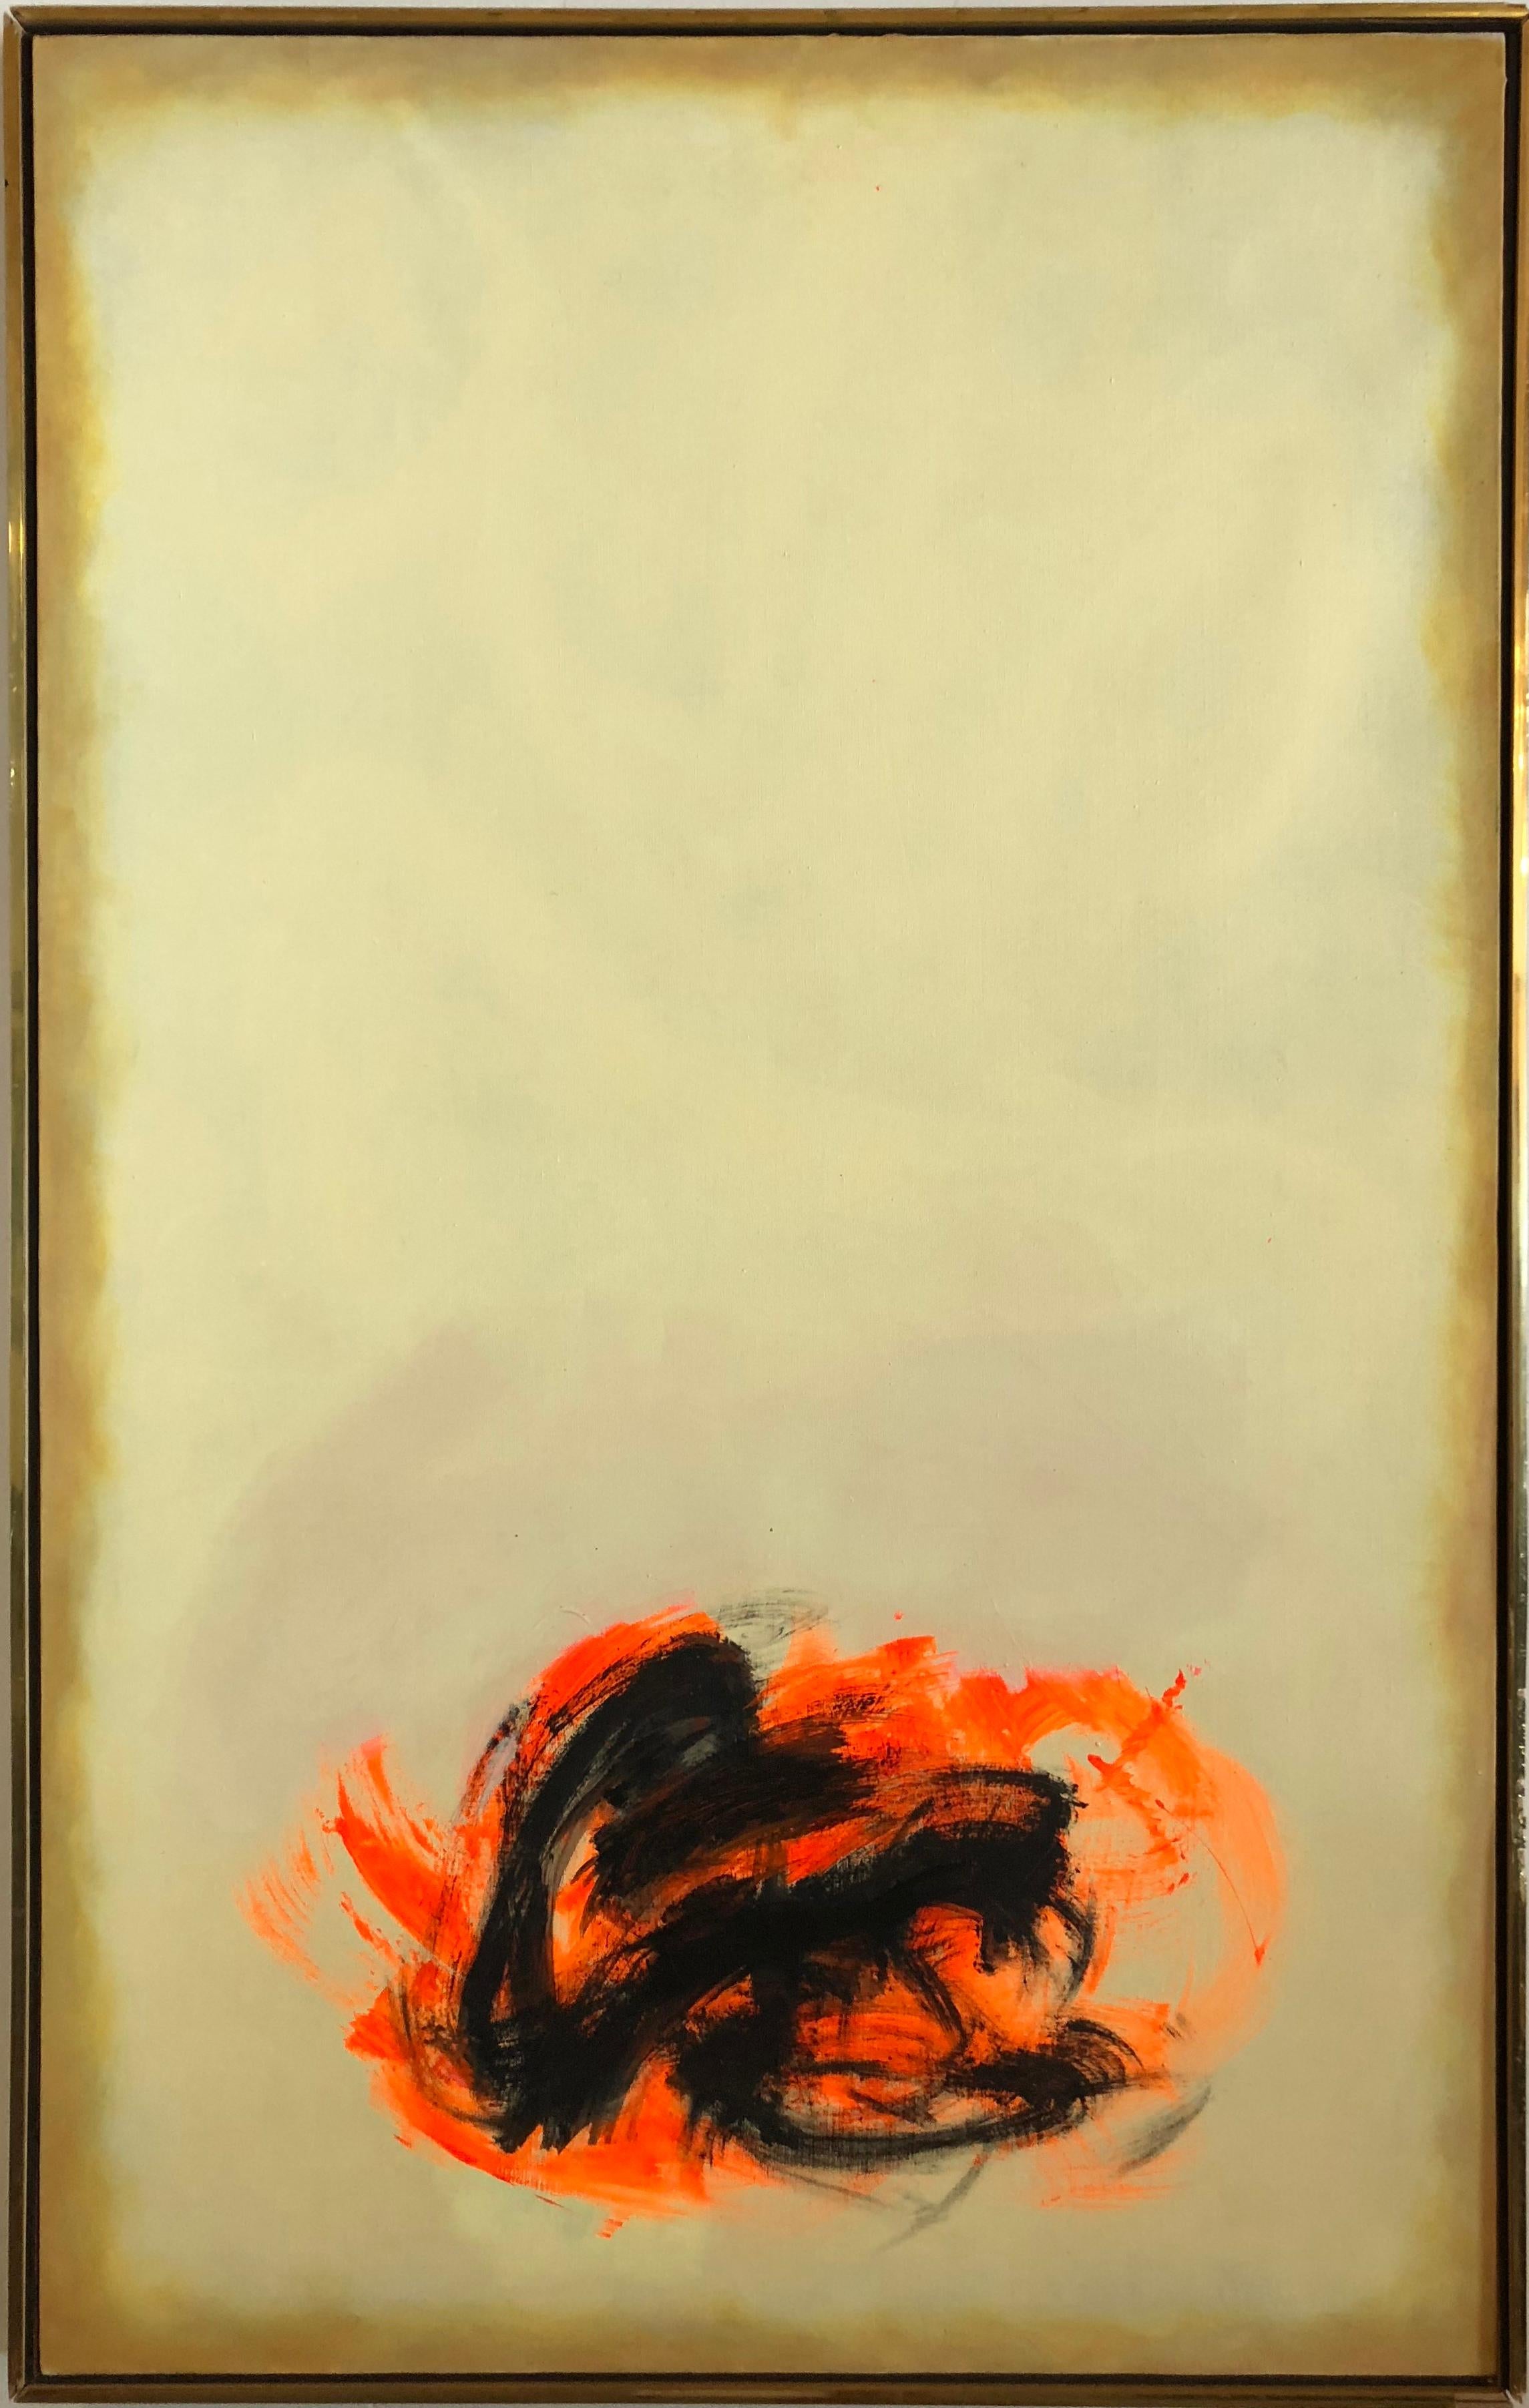 A vertical abstract painting in fiery orange and black by Cleve Gray. Gray was known for integrating Abstract Expressionism, Color Field, and Chinese scroll painting techniques, and this work is an excellent example. The orange and black paint